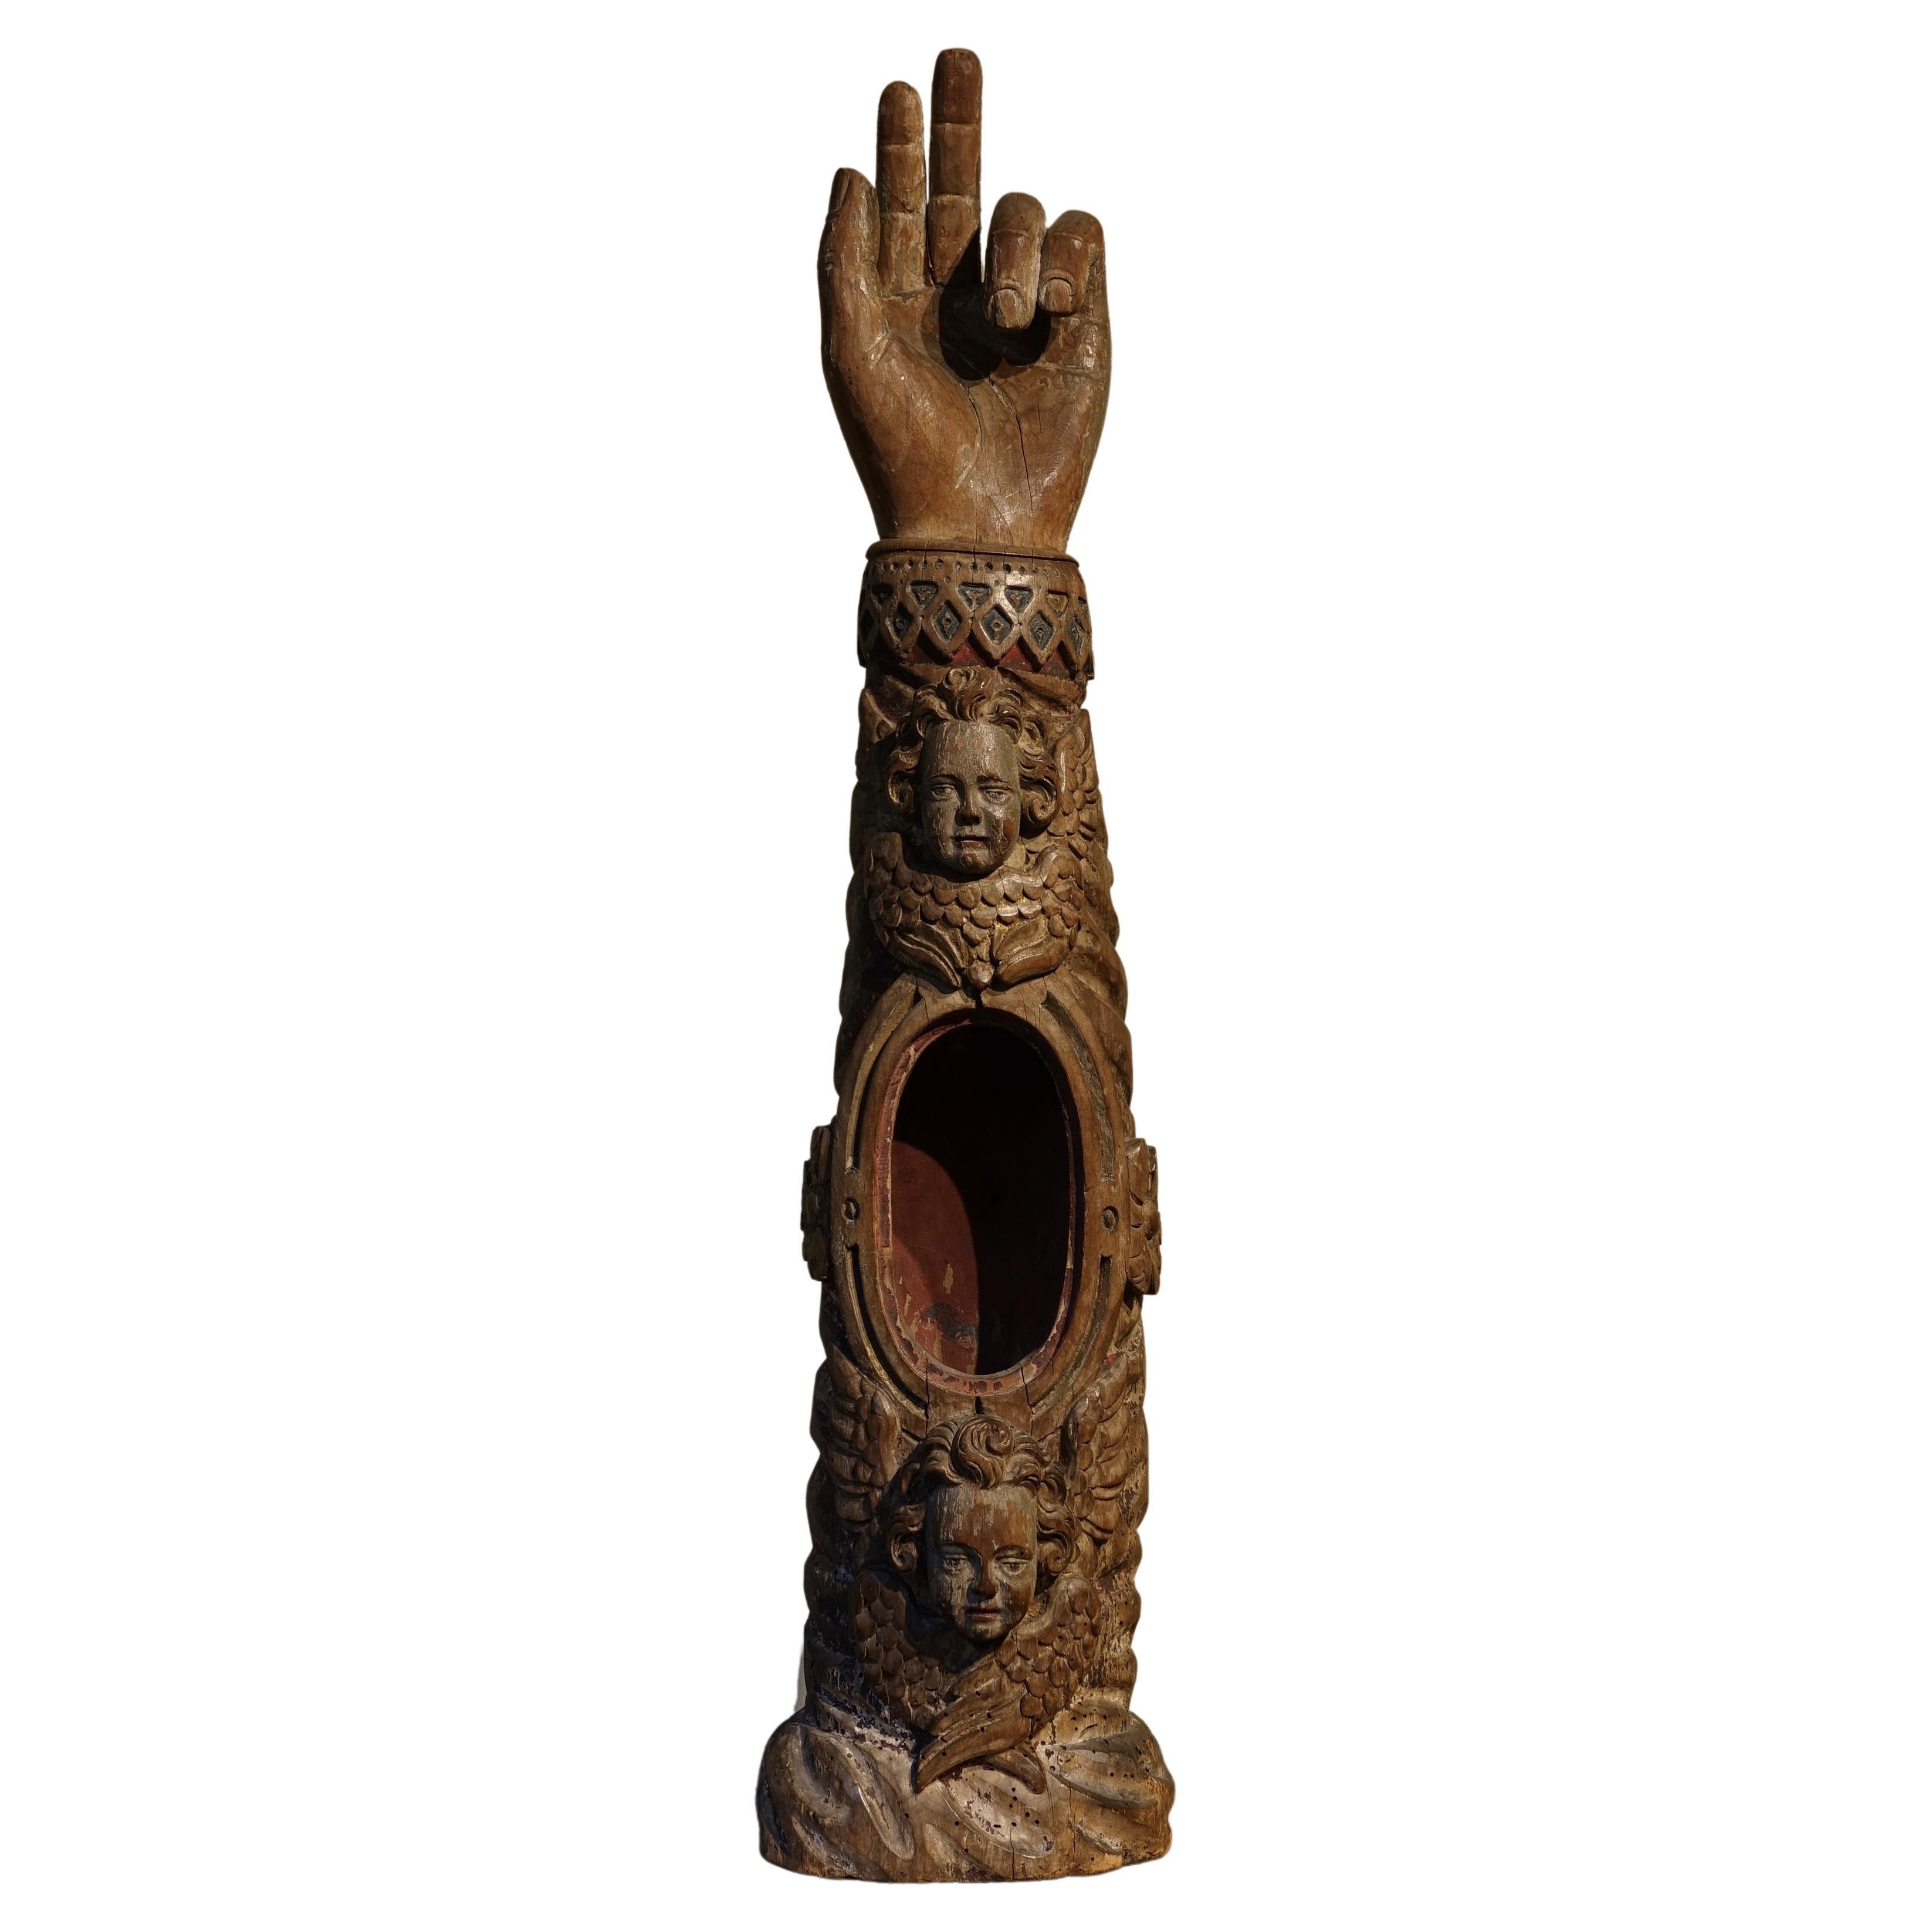 Carved Arm Reliquary, Venice, First Half of, 17th Century